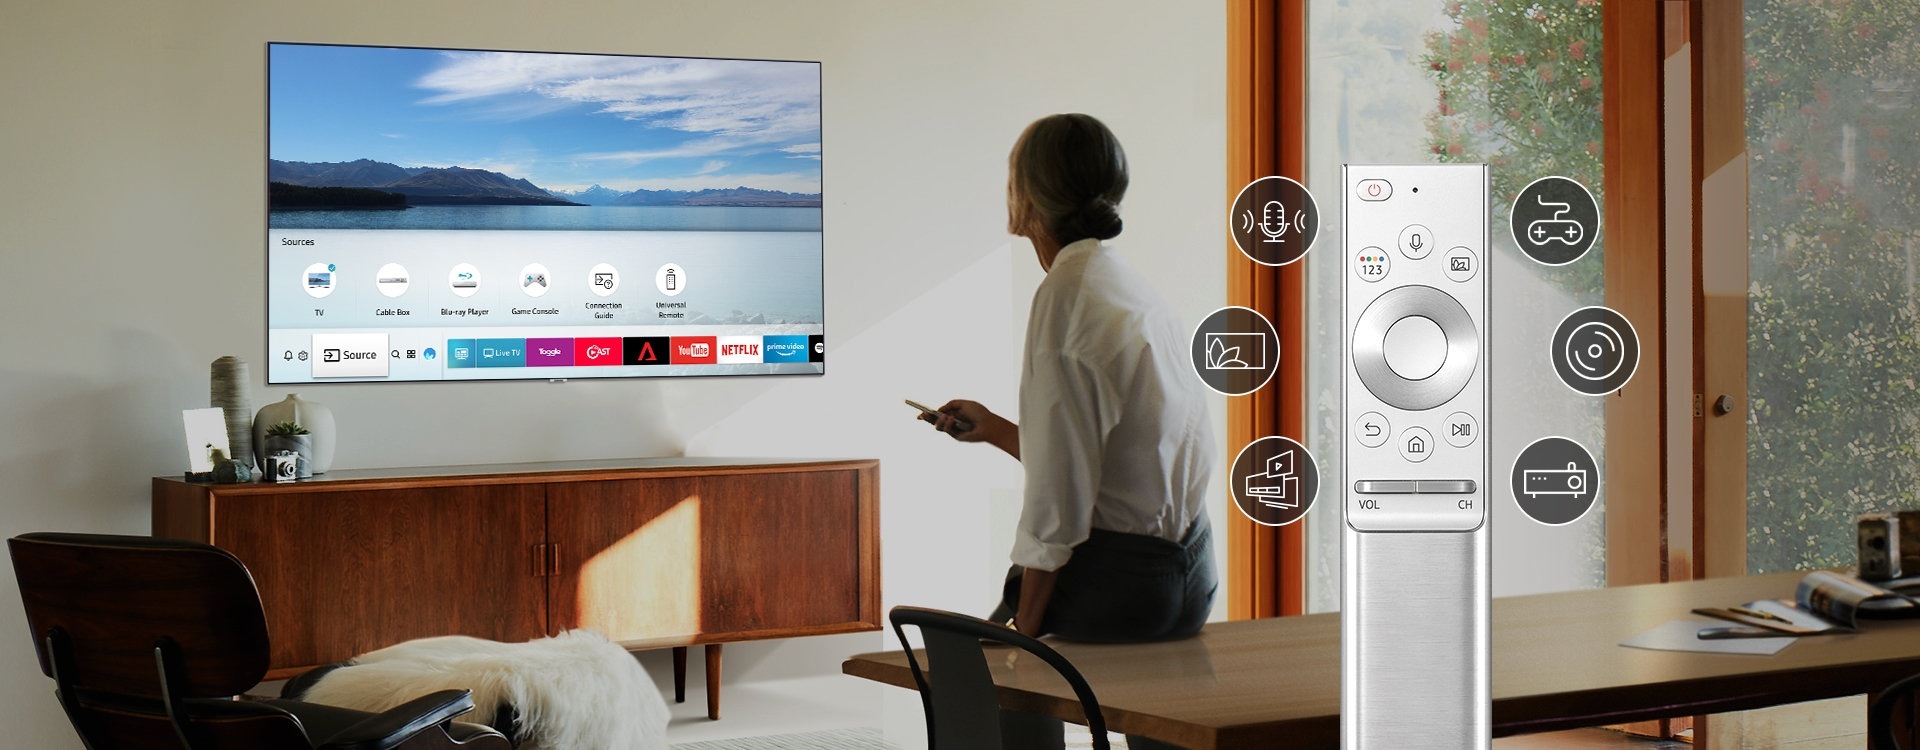 In front of the TV is a woman sitting on the desk with a remote. Next to her is an image of an enlarged remote with 6 icons. The icons represent that remote controls for several devices such as game and DVD players are integrated into one remote control. 